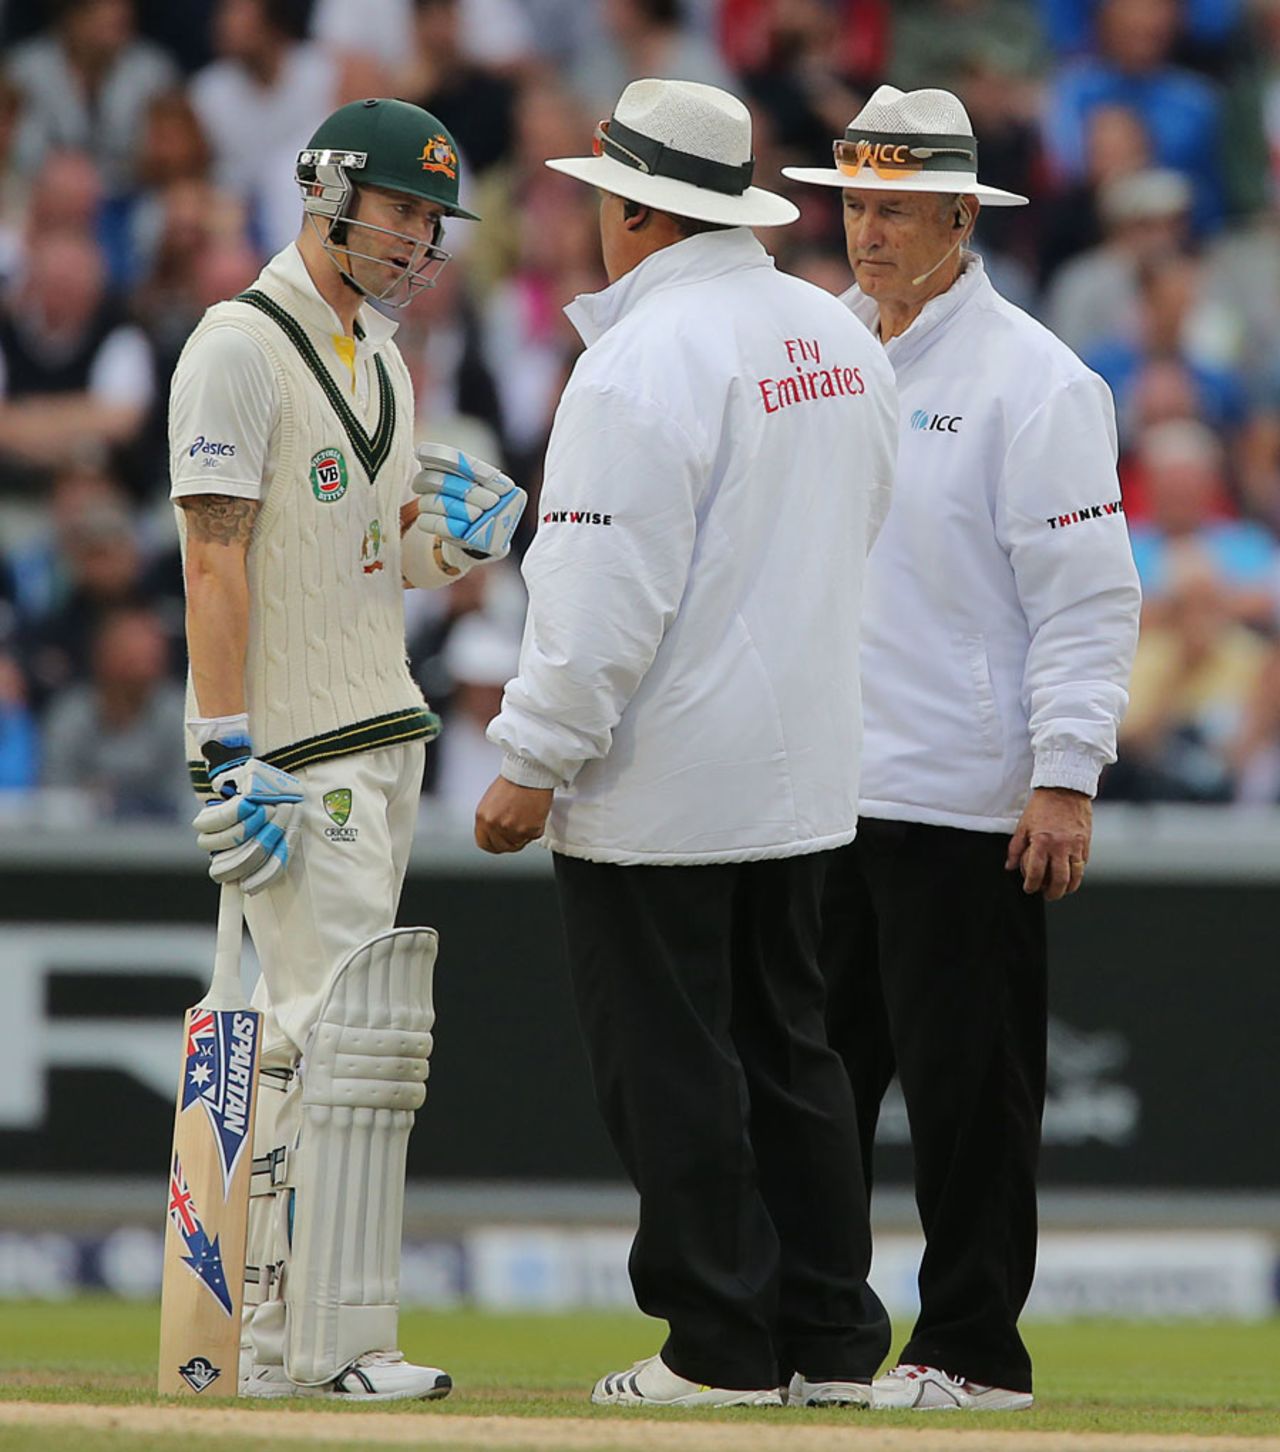 Michael Clarke chats animatedly with the umpires, England v Australia, 3rd Investec Test, Old Trafford, 4th day, August 4, 2013